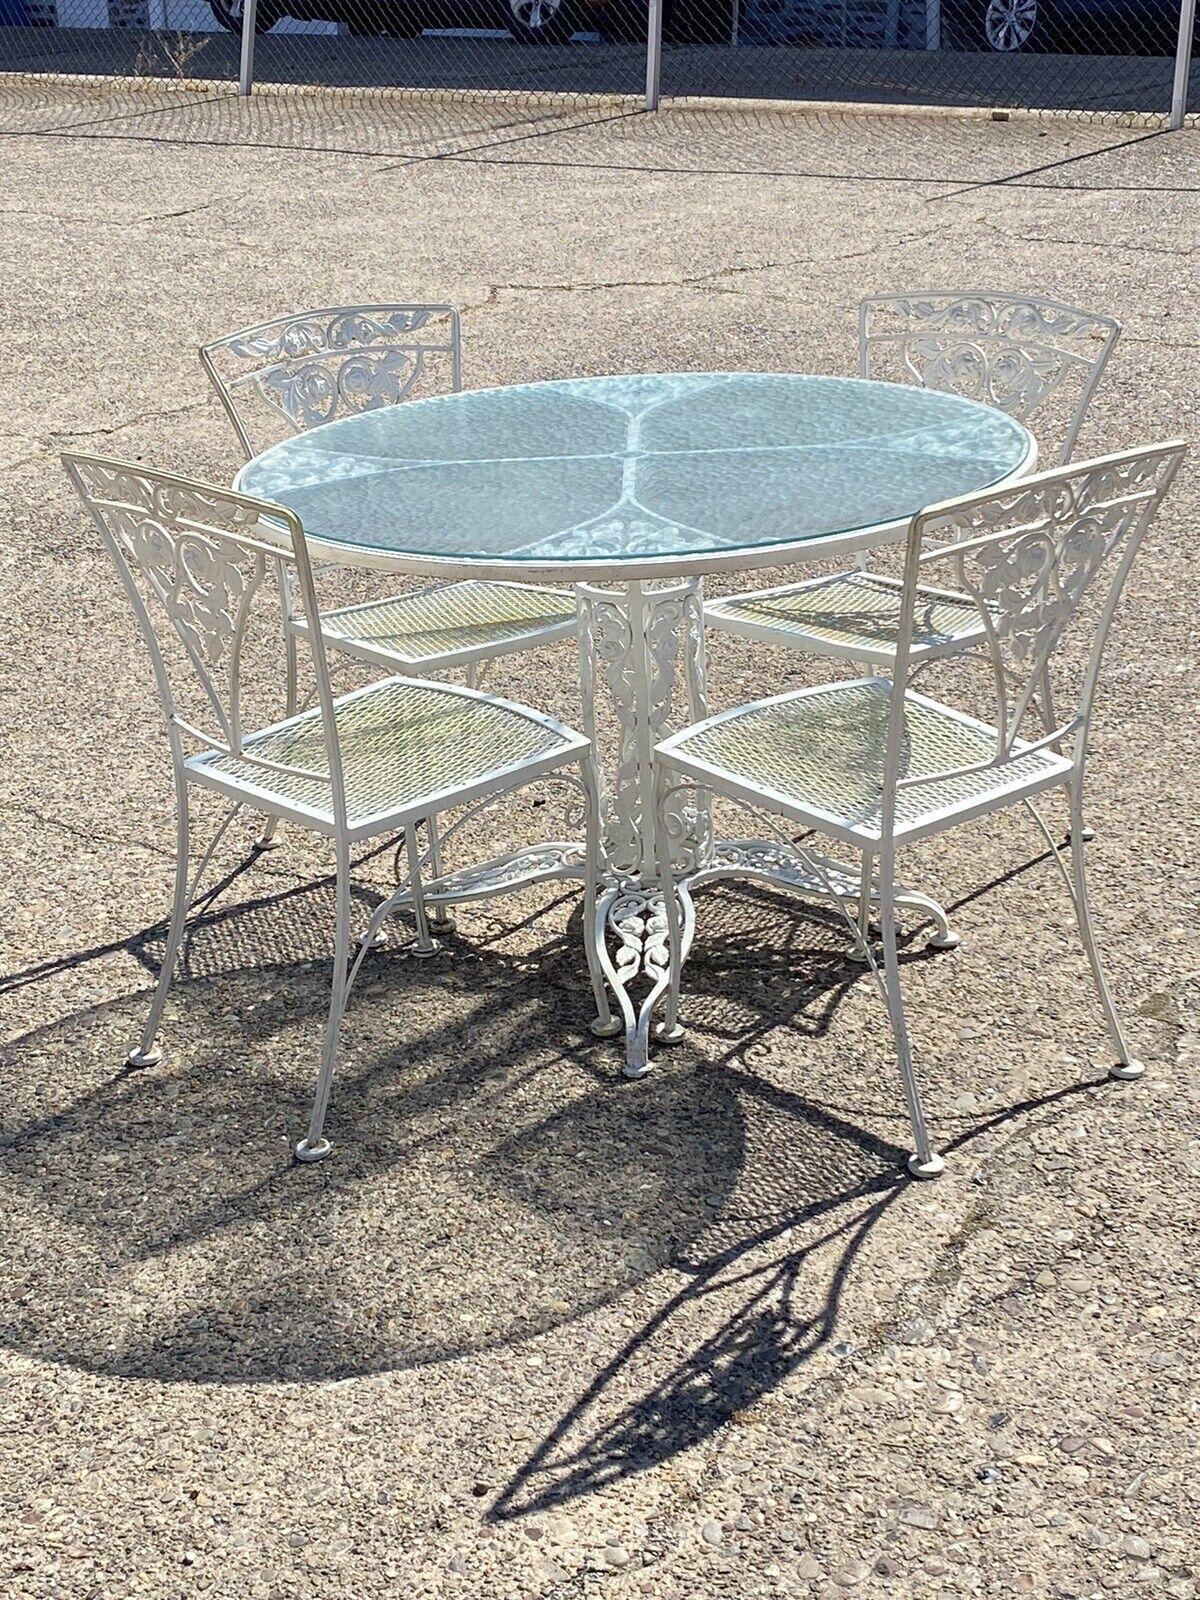 Russell Woodard Orleans Pattern Wrought Iron Patio Garden Dining Set - 5 Pc Set. Item features a very rare ornate pedestal base round dining table with glass top, Wrought iron frames, (4) dining chairs, very nice vintage set, quality American